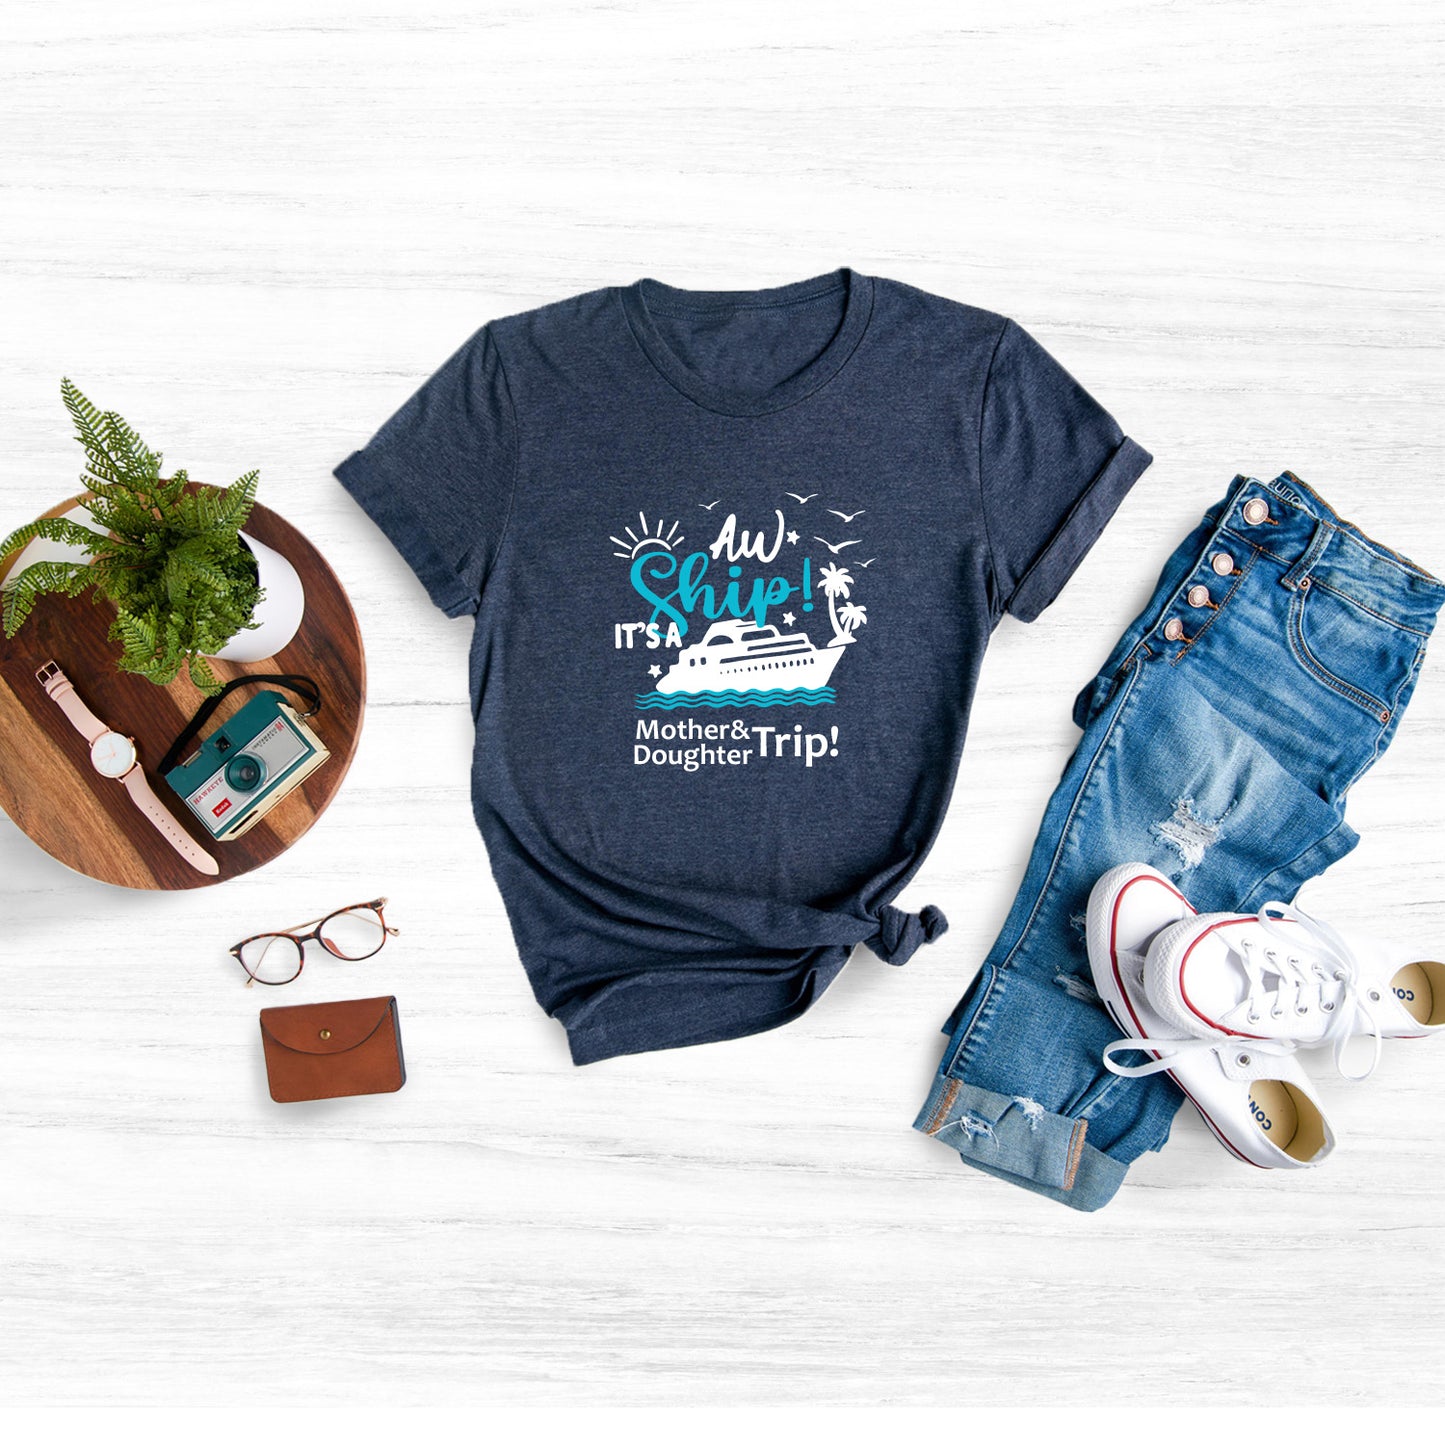 Cruise Family Shirts, Mother Daughter Cruise Shirts: Embark on an Adventure of Memories Together